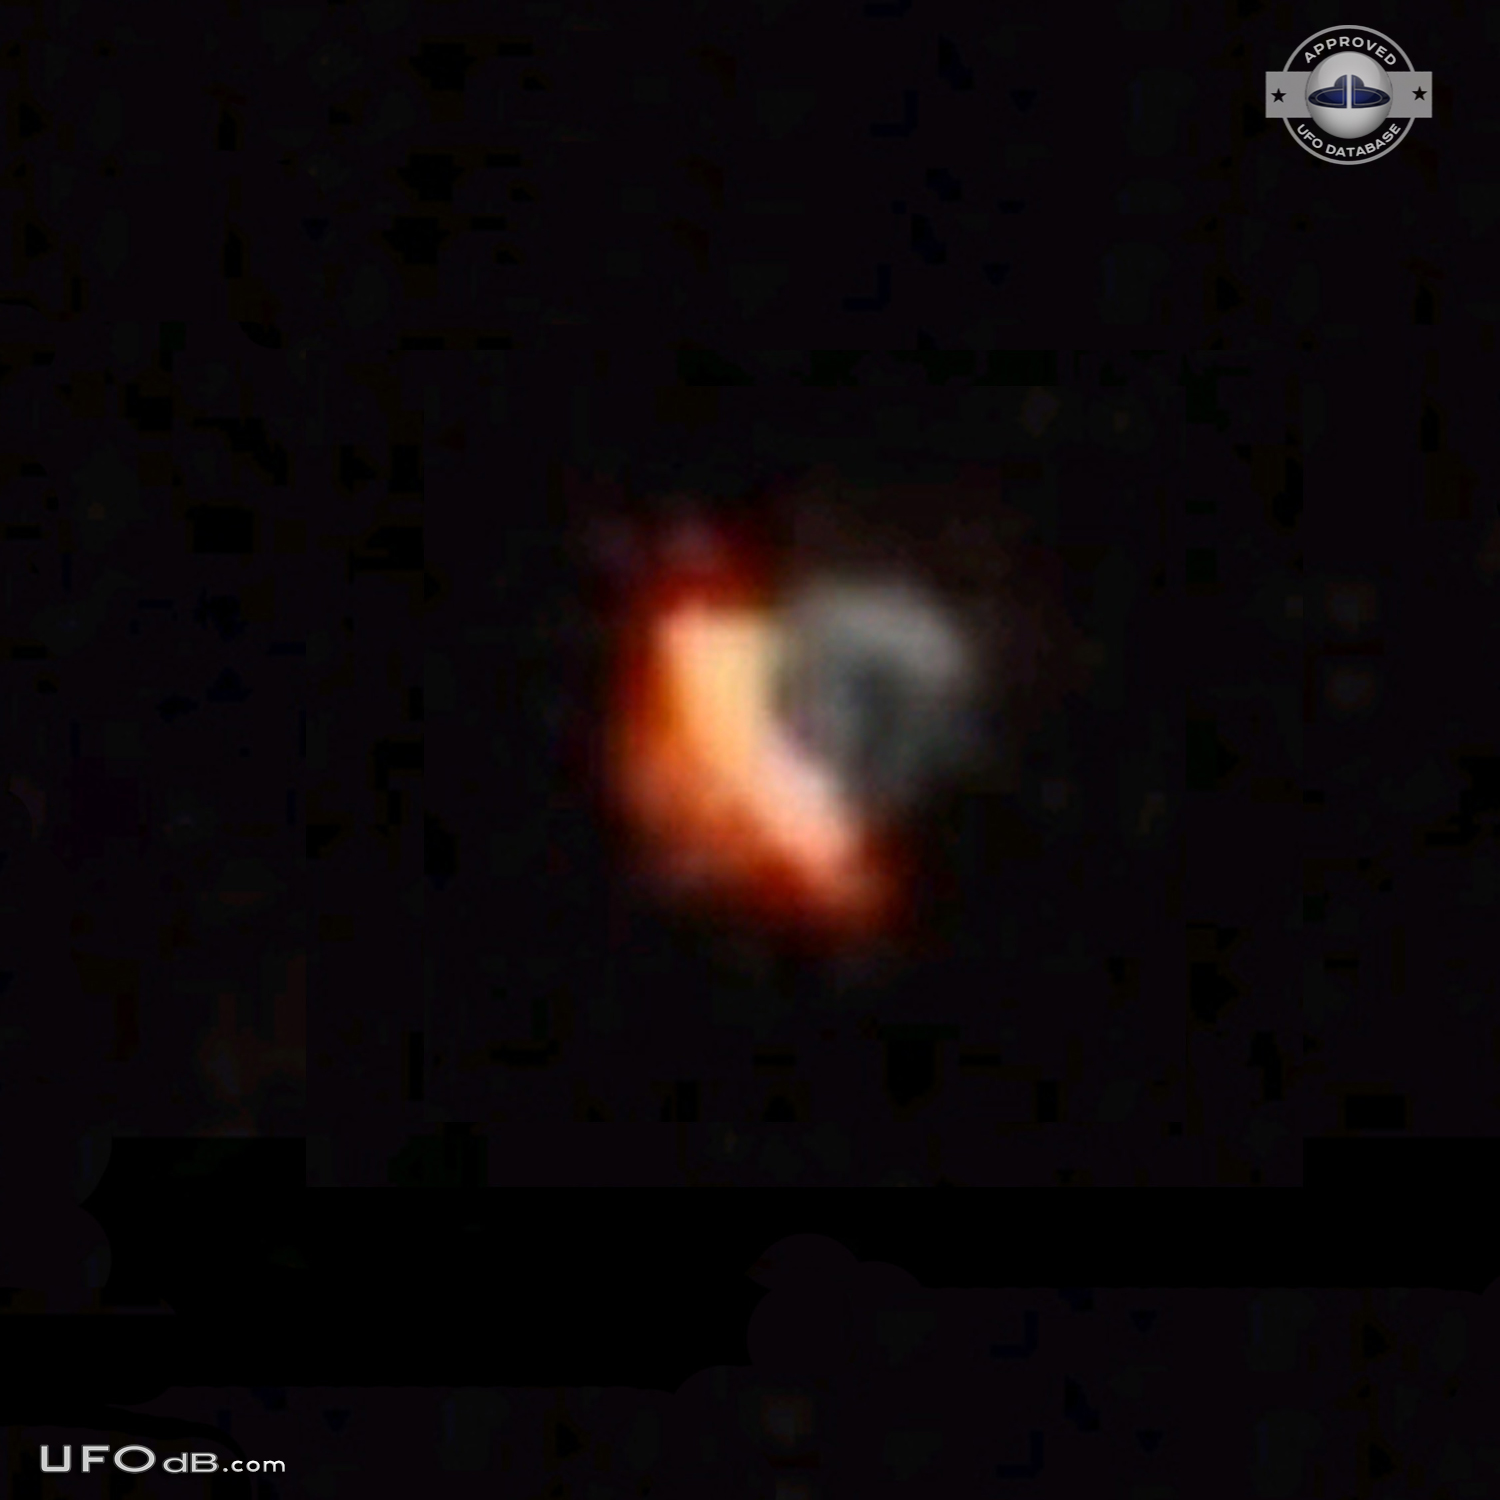 UFOs twinkling of many colors makes the News in Hecker Illinois 2012 UFO Picture #512-3